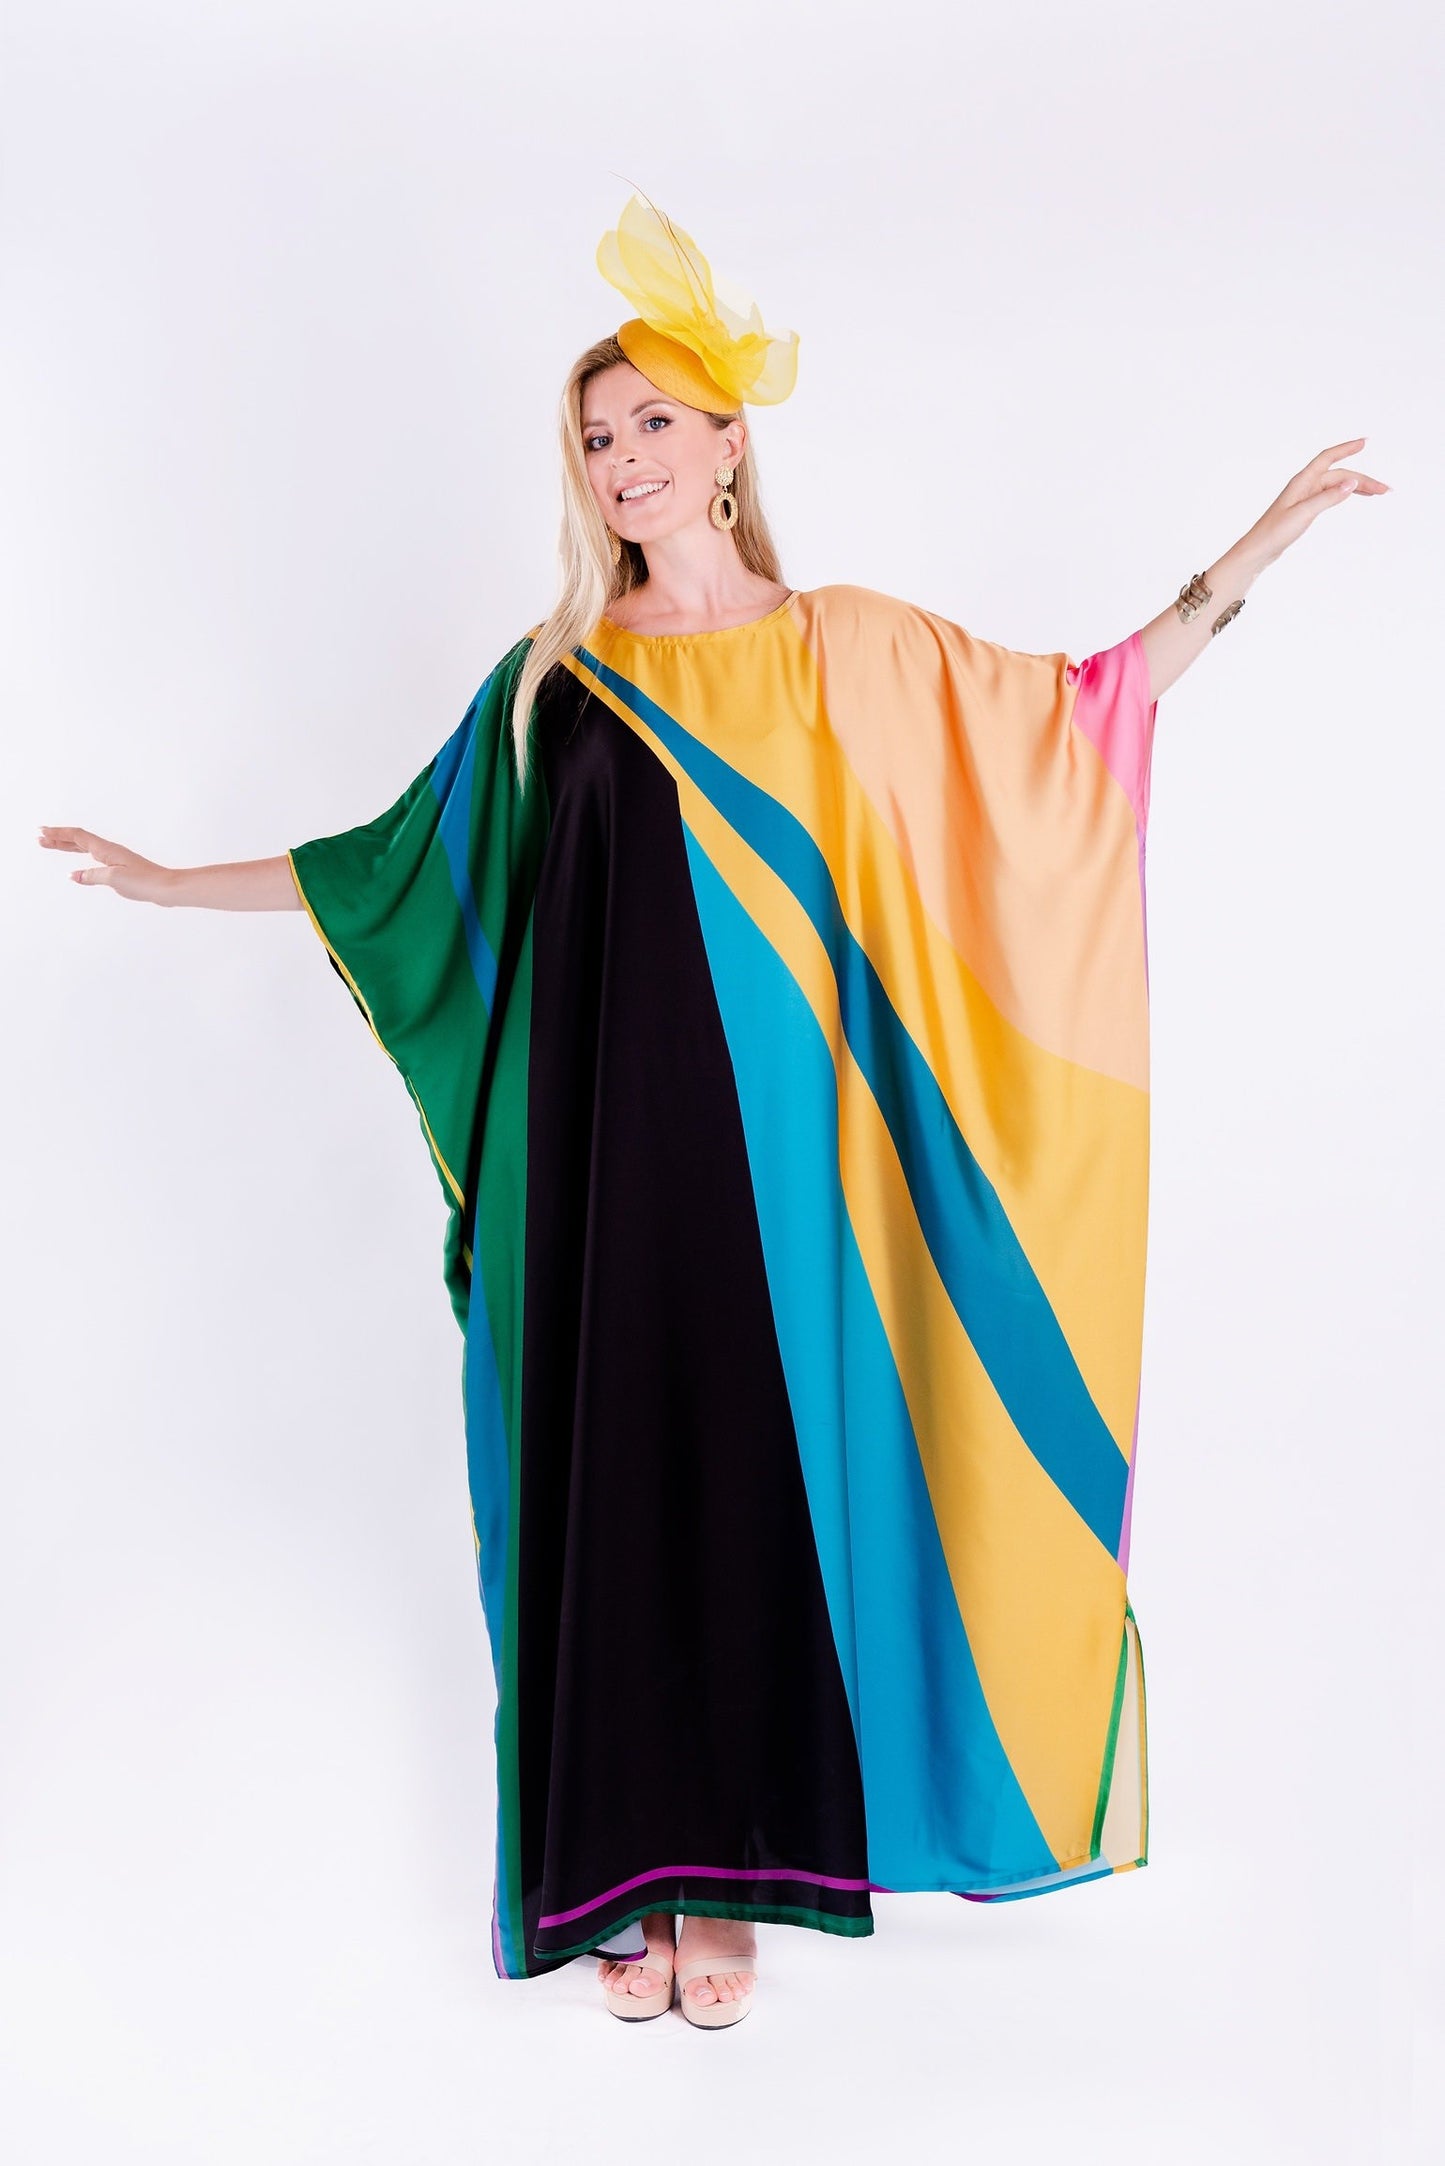 The model in the image is wearing Multicolor Printed Satin Silk Party Wear Kaftan from Alice Milan. Crafted with the finest materials and impeccable attention to detail, the Partywear Dress looks premium, trendy, luxurious and offers unparalleled comfort. It’s a perfect clothing option for loungewear, resort wear, party wear or for an airport look. The woman in the image looks happy, and confident with her style statement putting a happy smile on her face.